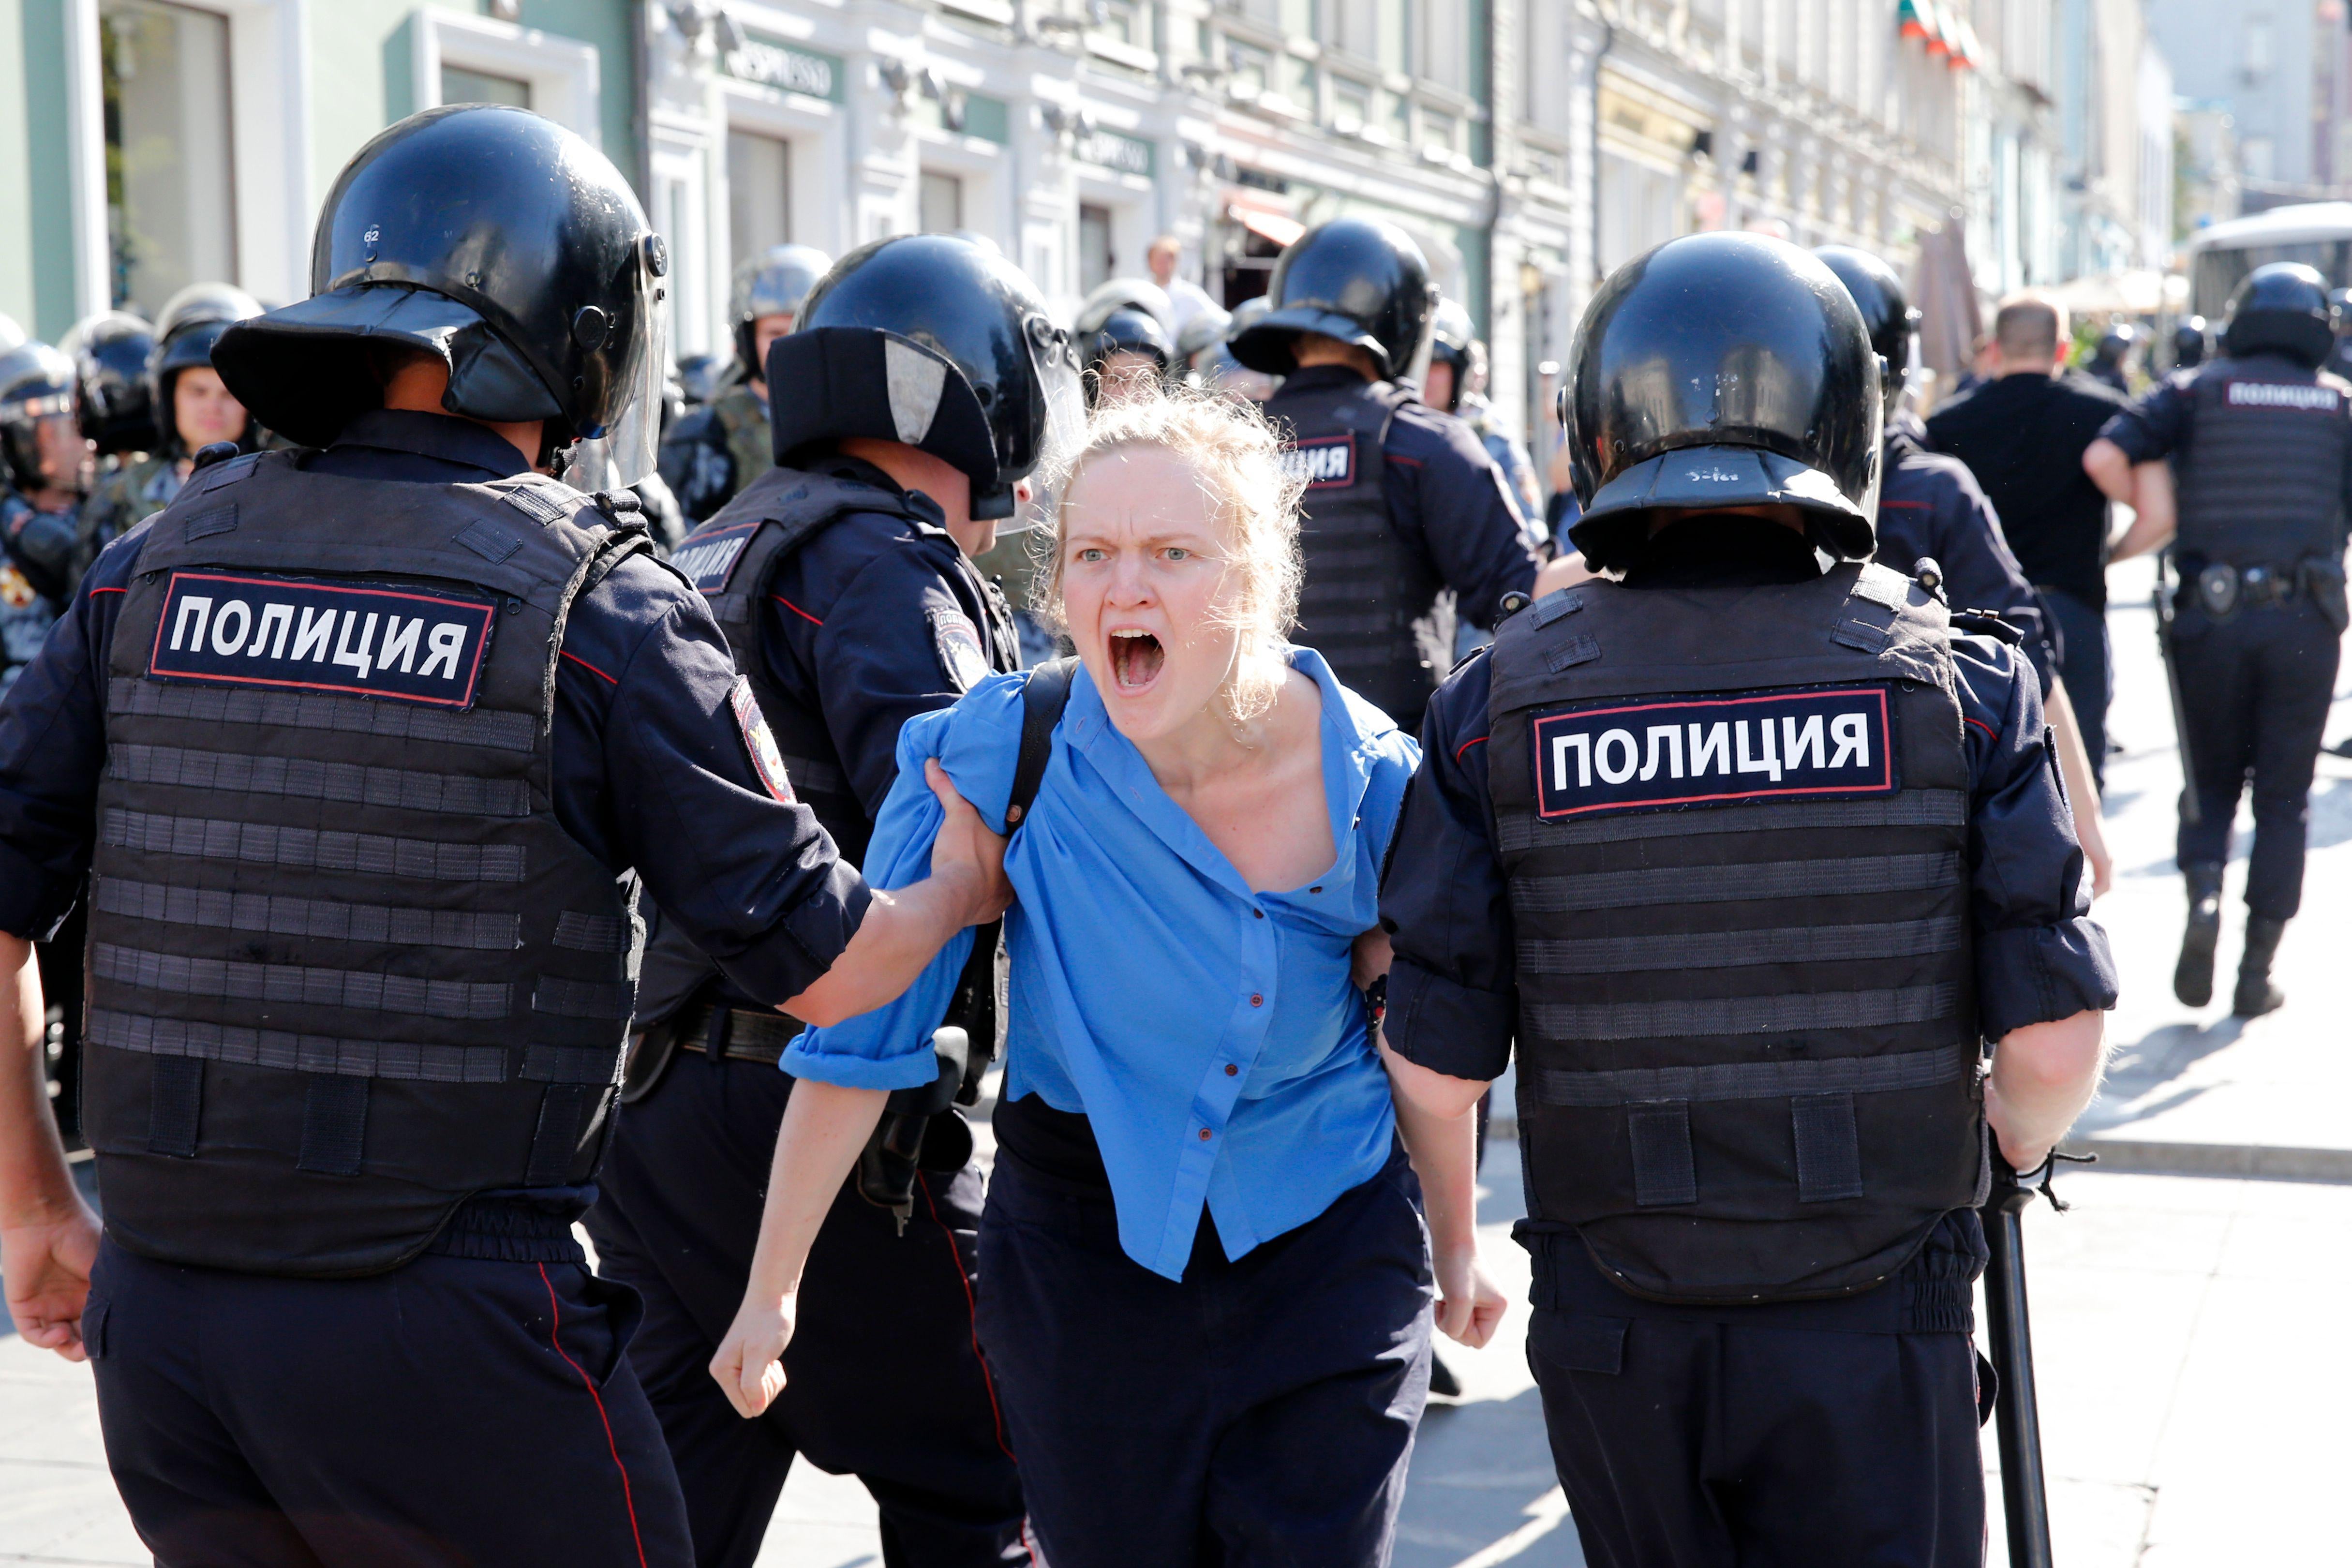 Police officers detain a protester during an unauthorised rally demanding independent and opposition candidates be allowed to run for office in local election in September, in downtown Moscow on July 27, 2019.